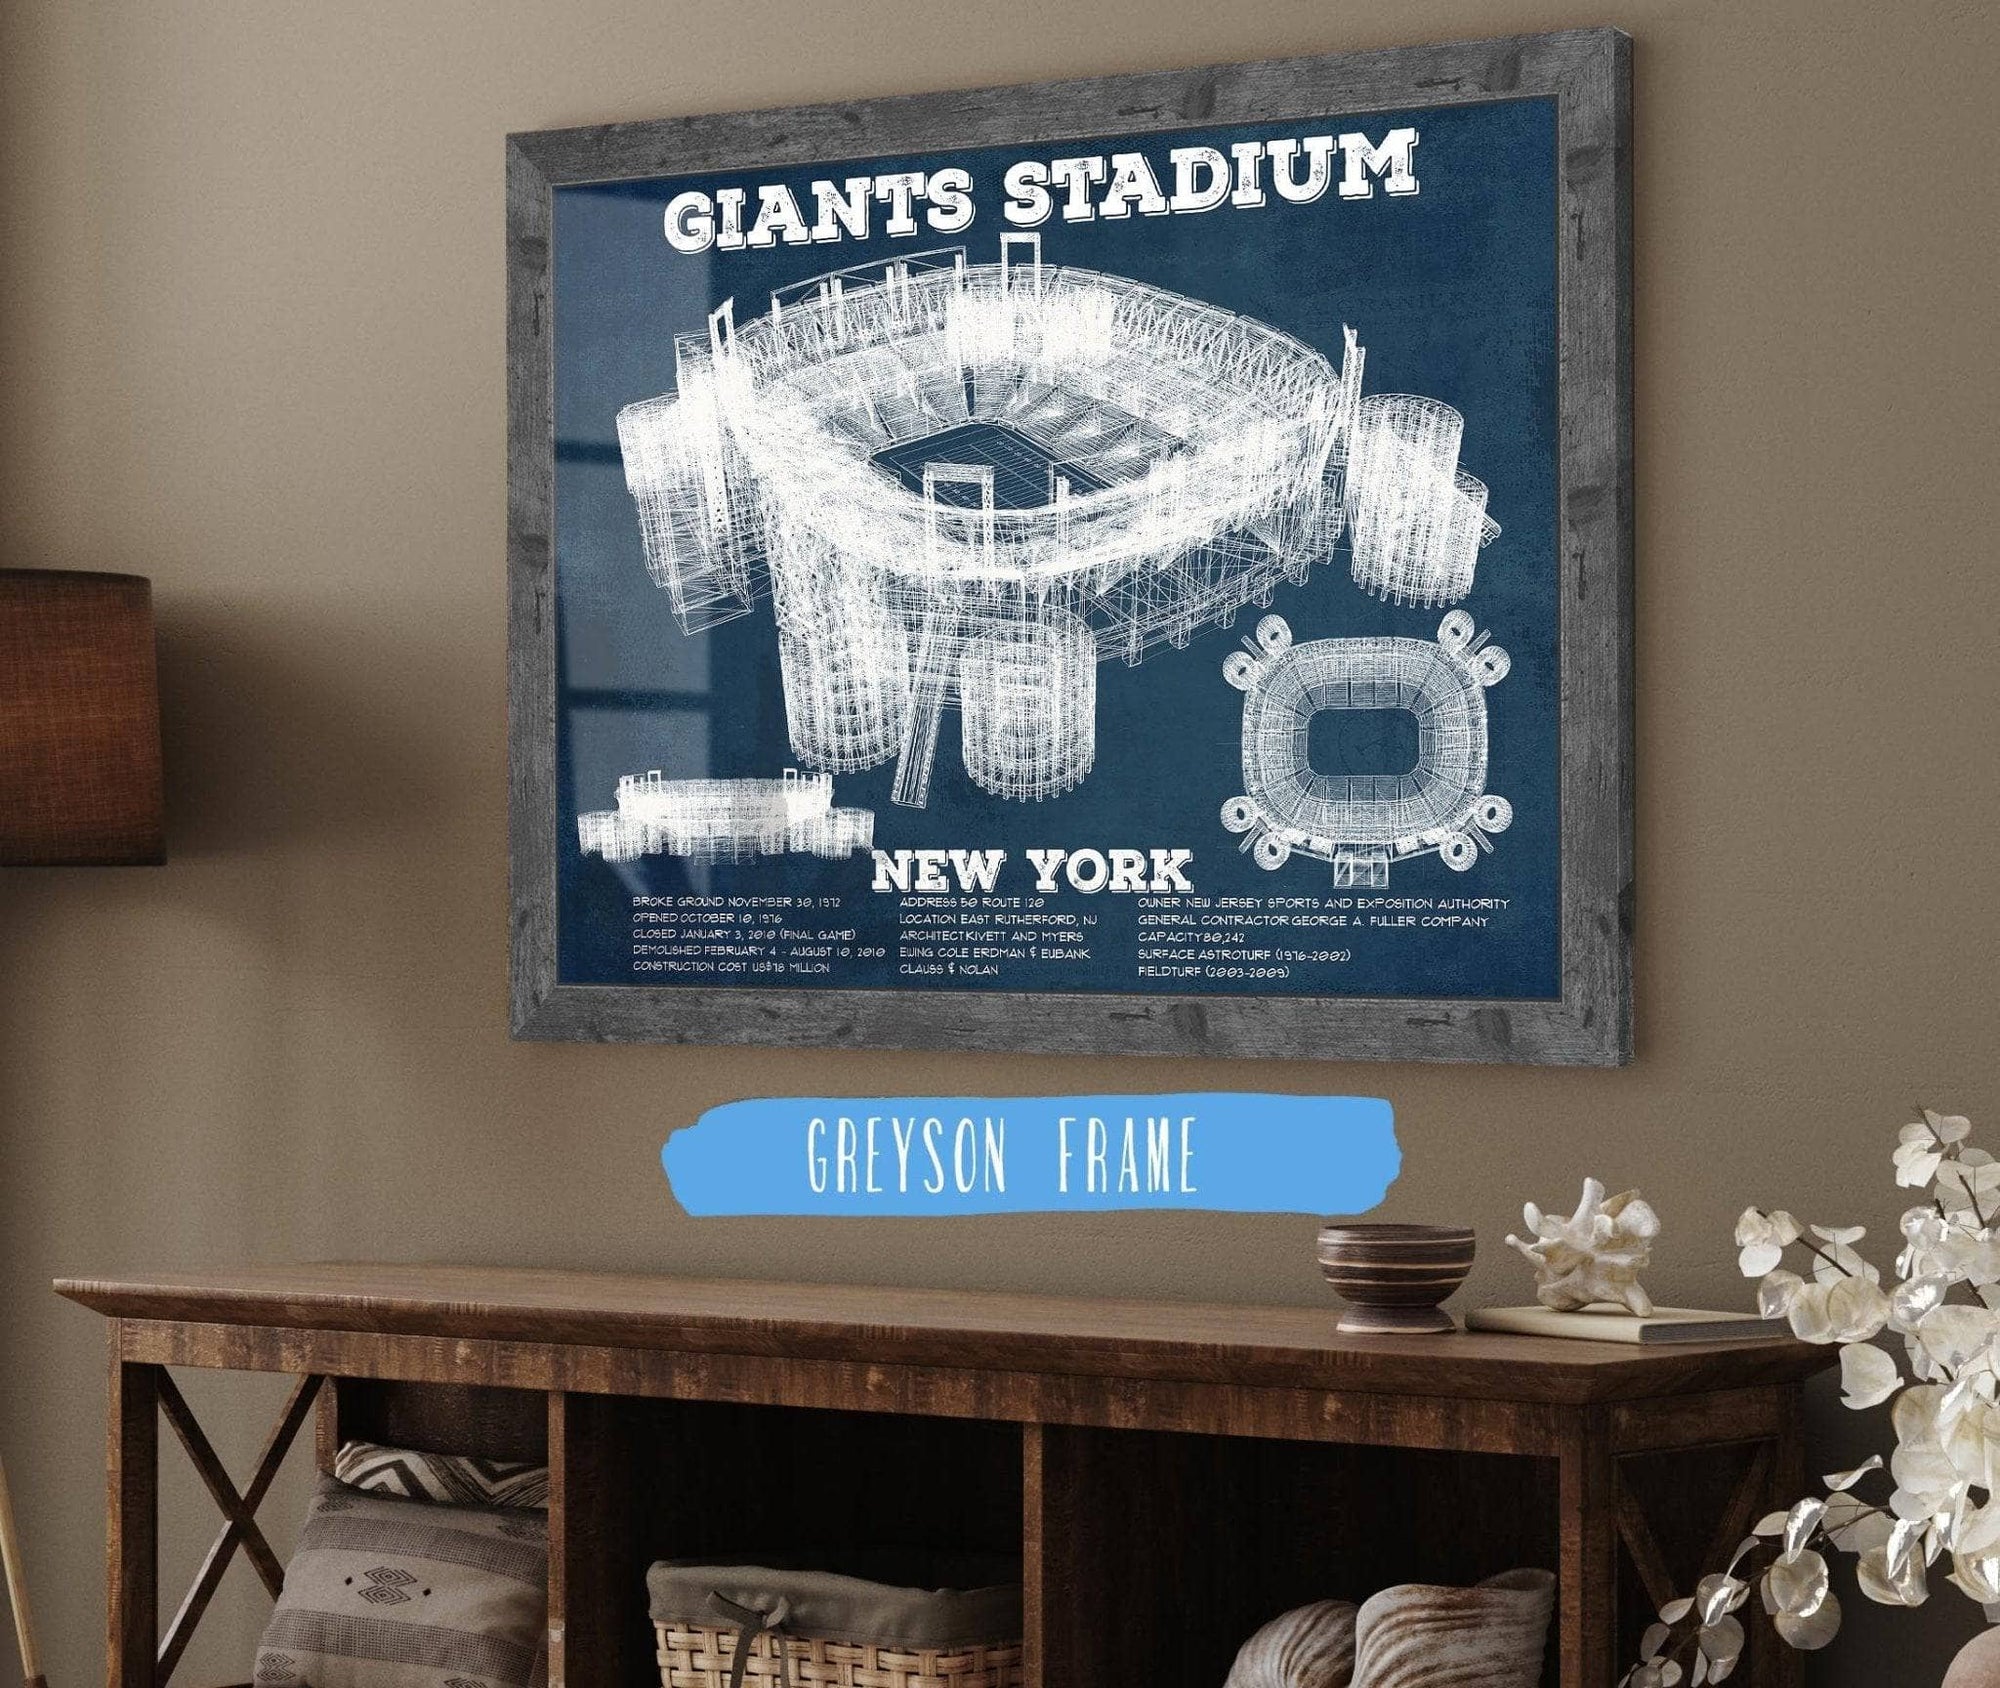 Cutler West Pro Football Collection 14" x 11" / Greyson Frame Giants Stadium - The Meadowlands New York Vintage Print 731428206-TOP